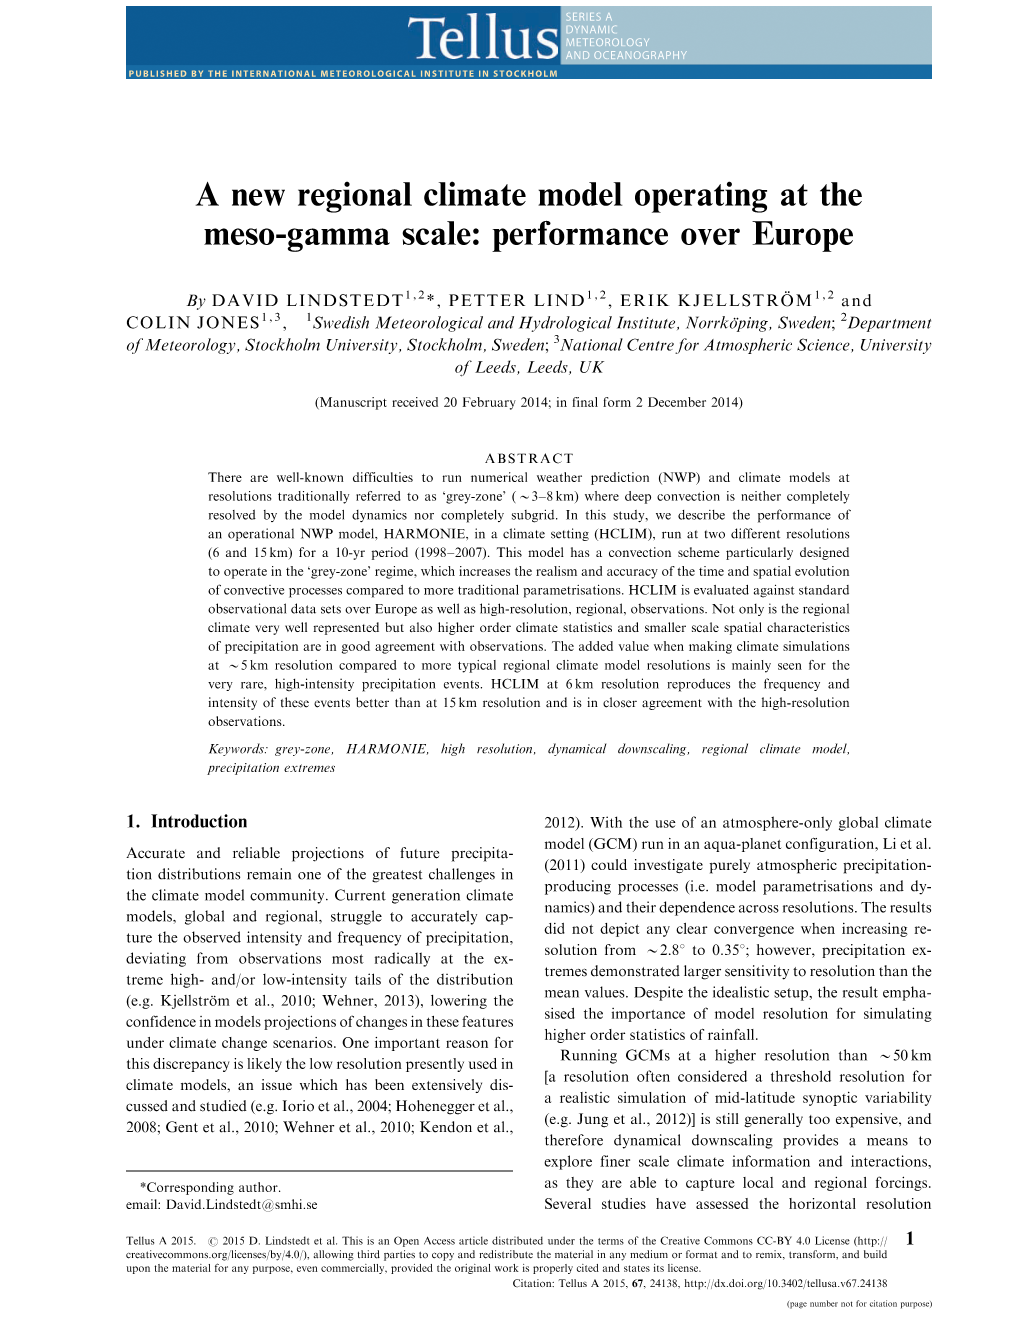 A New Regional Climate Model Operating at the Meso-Gamma Scale: Performance Over Europe